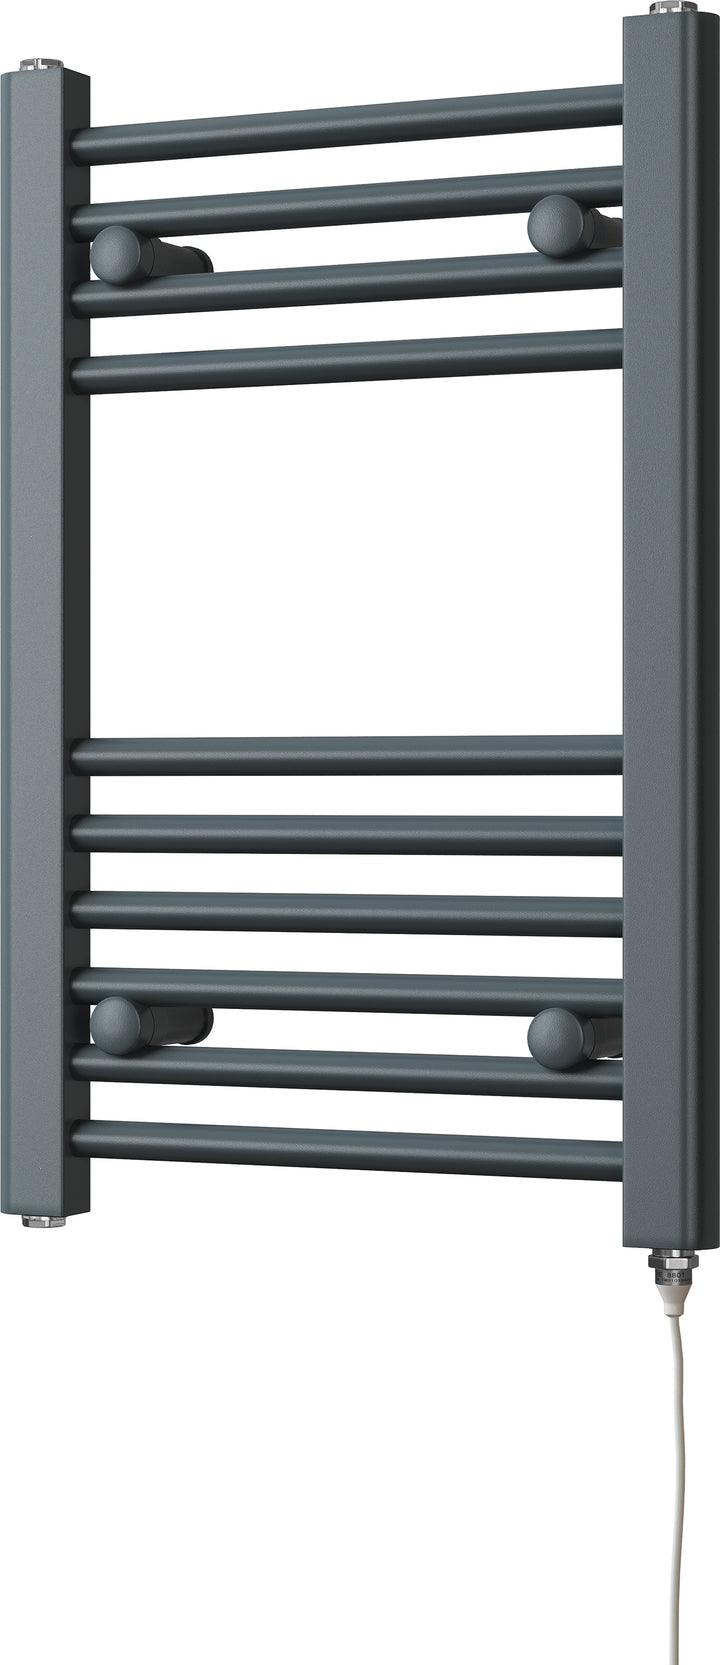 Zennor - Anthracite Electric Towel Rail H600mm x W400mm Straight 200w Standard